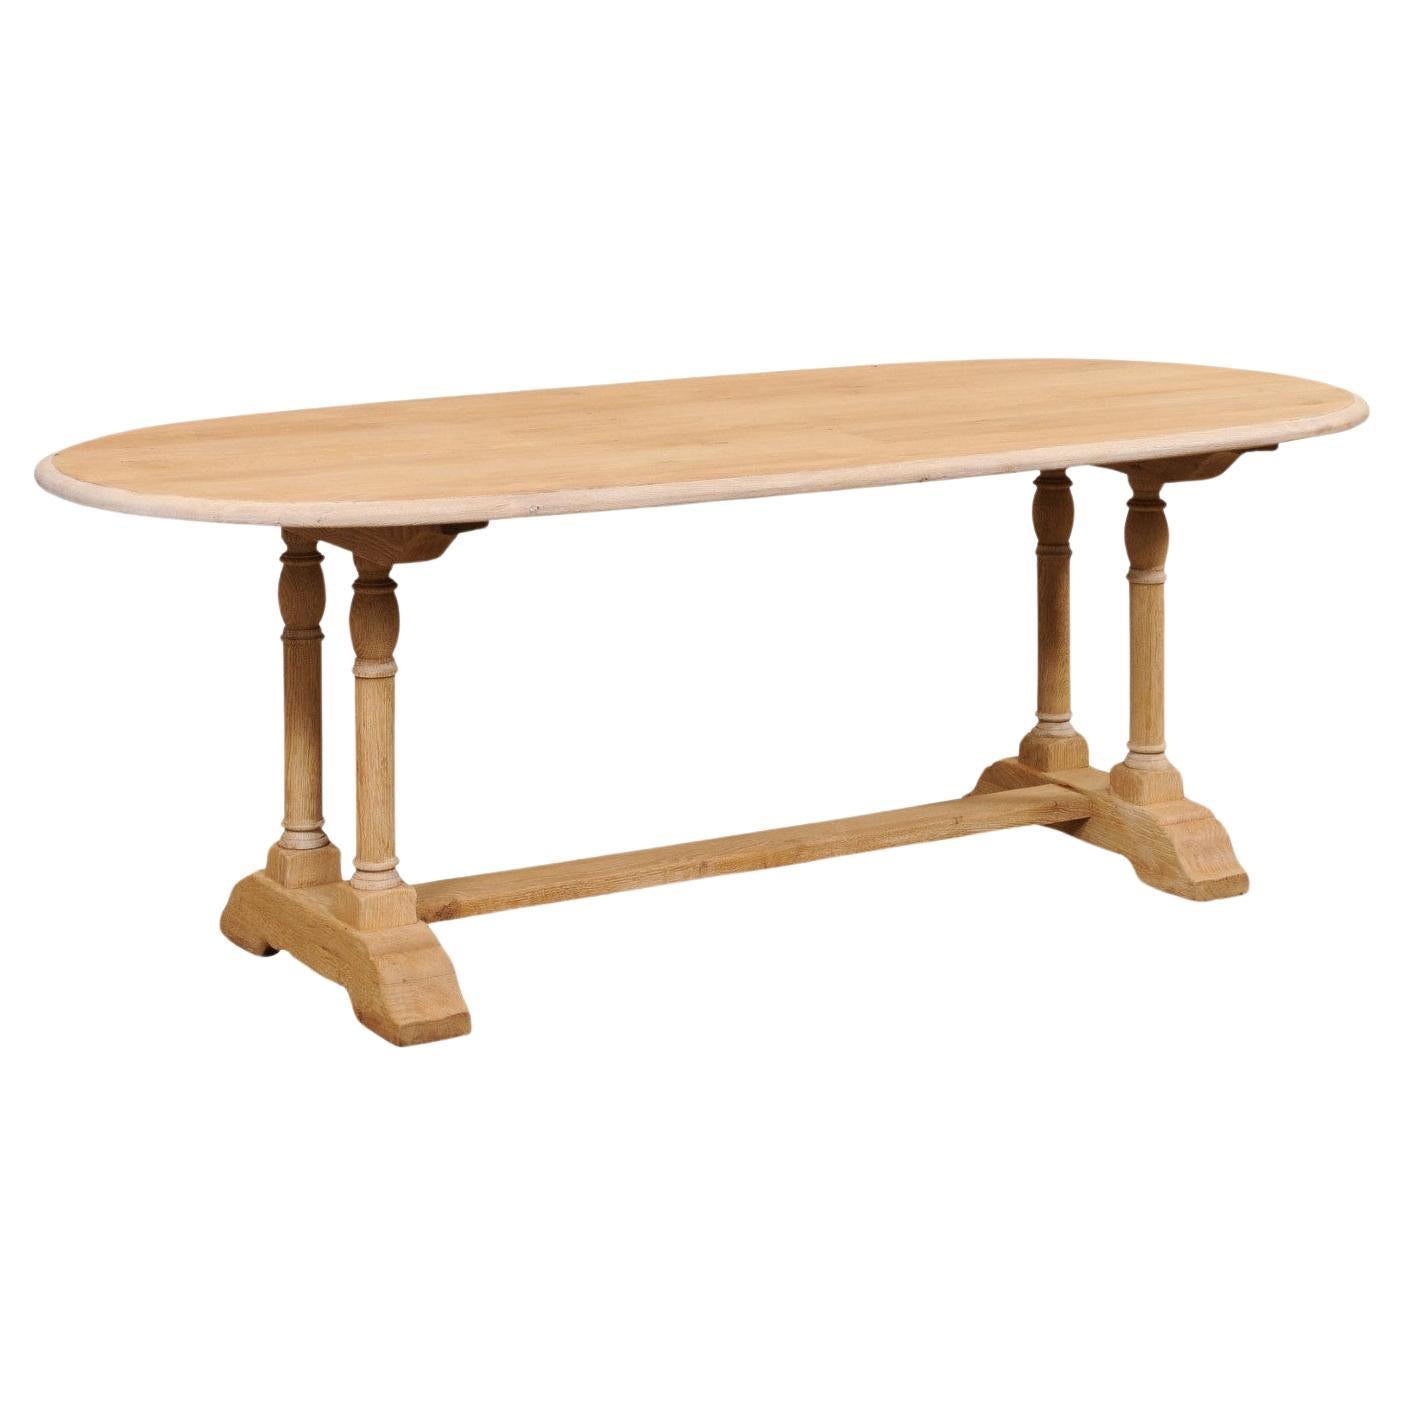 A French Oval-Shaped Bleached Wood Trestle Dining Table, Mid 20th Century For Sale